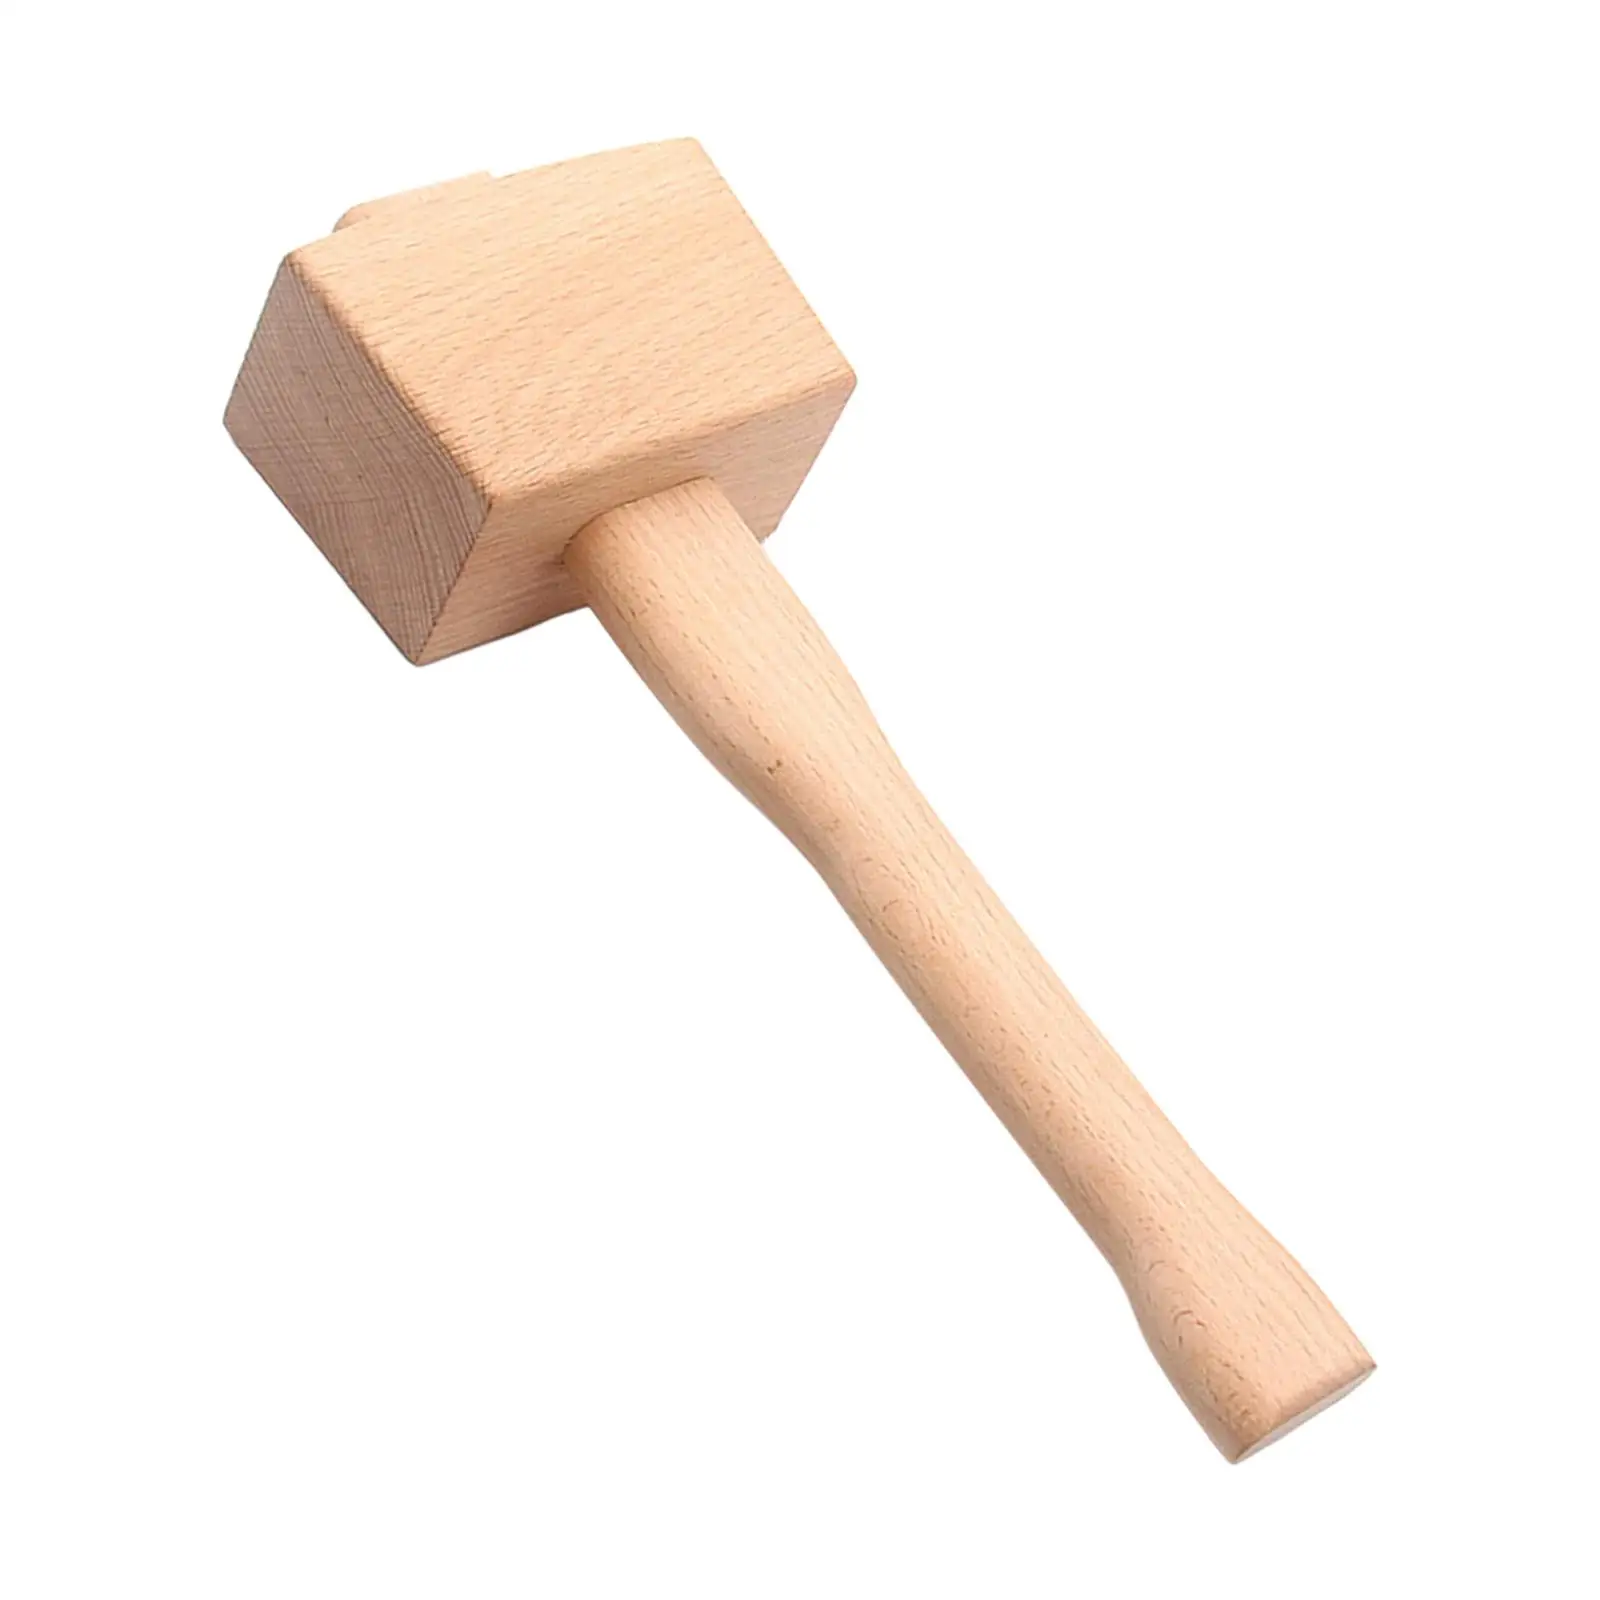 Beech Solid Wood Mallet Hand Hammer Accessory Wooden Mallet for Woodworking